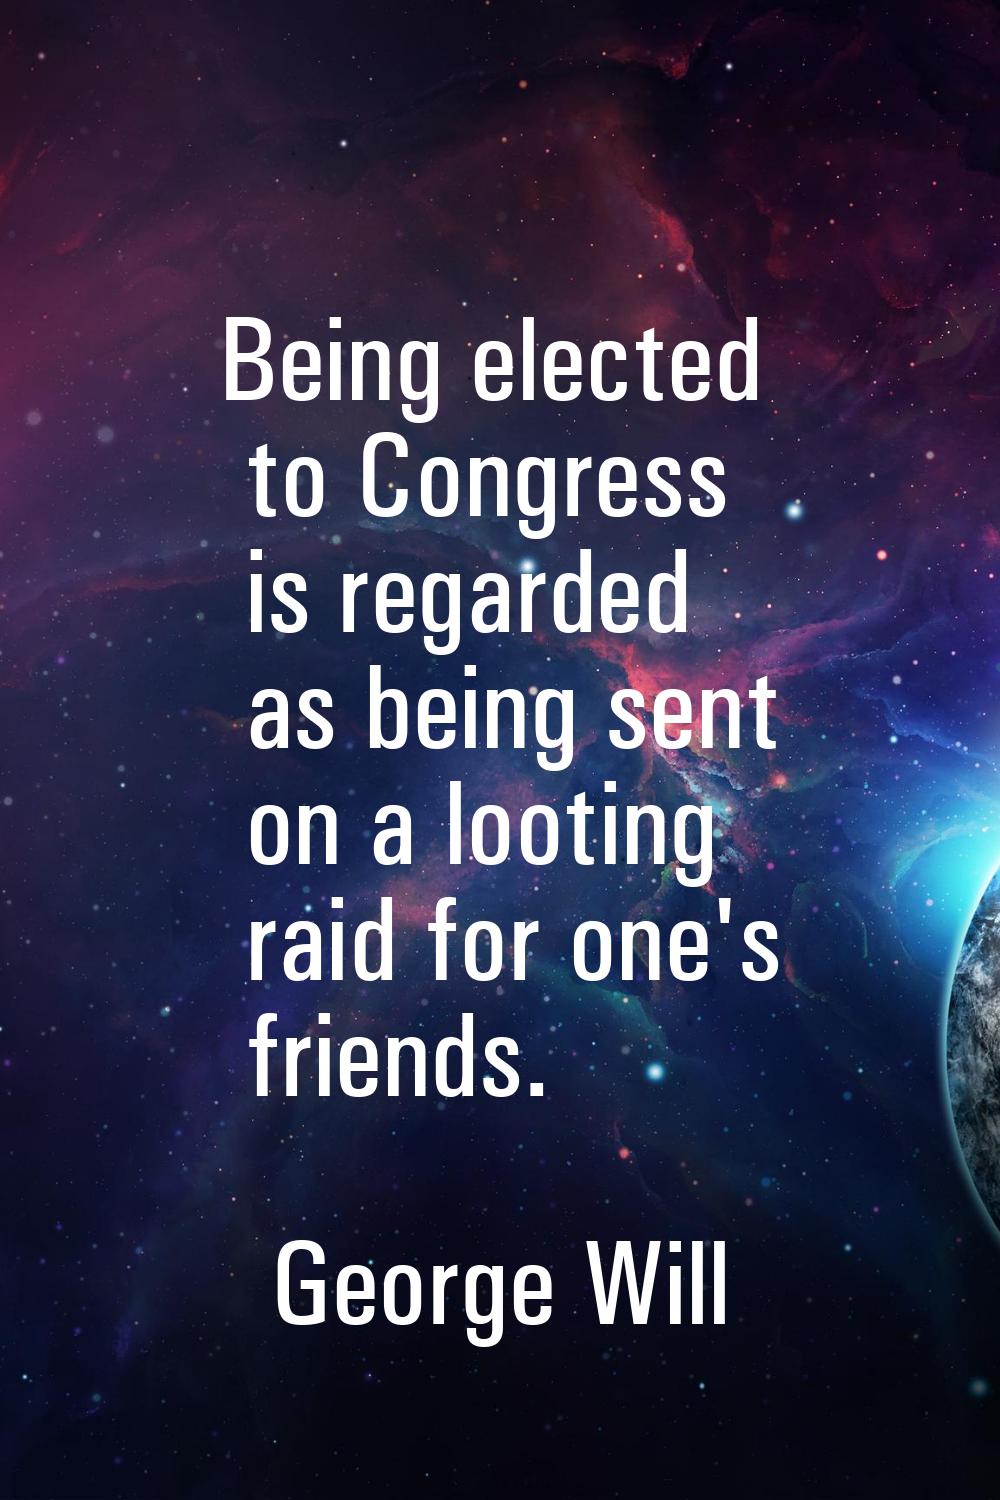 Being elected to Congress is regarded as being sent on a looting raid for one's friends.